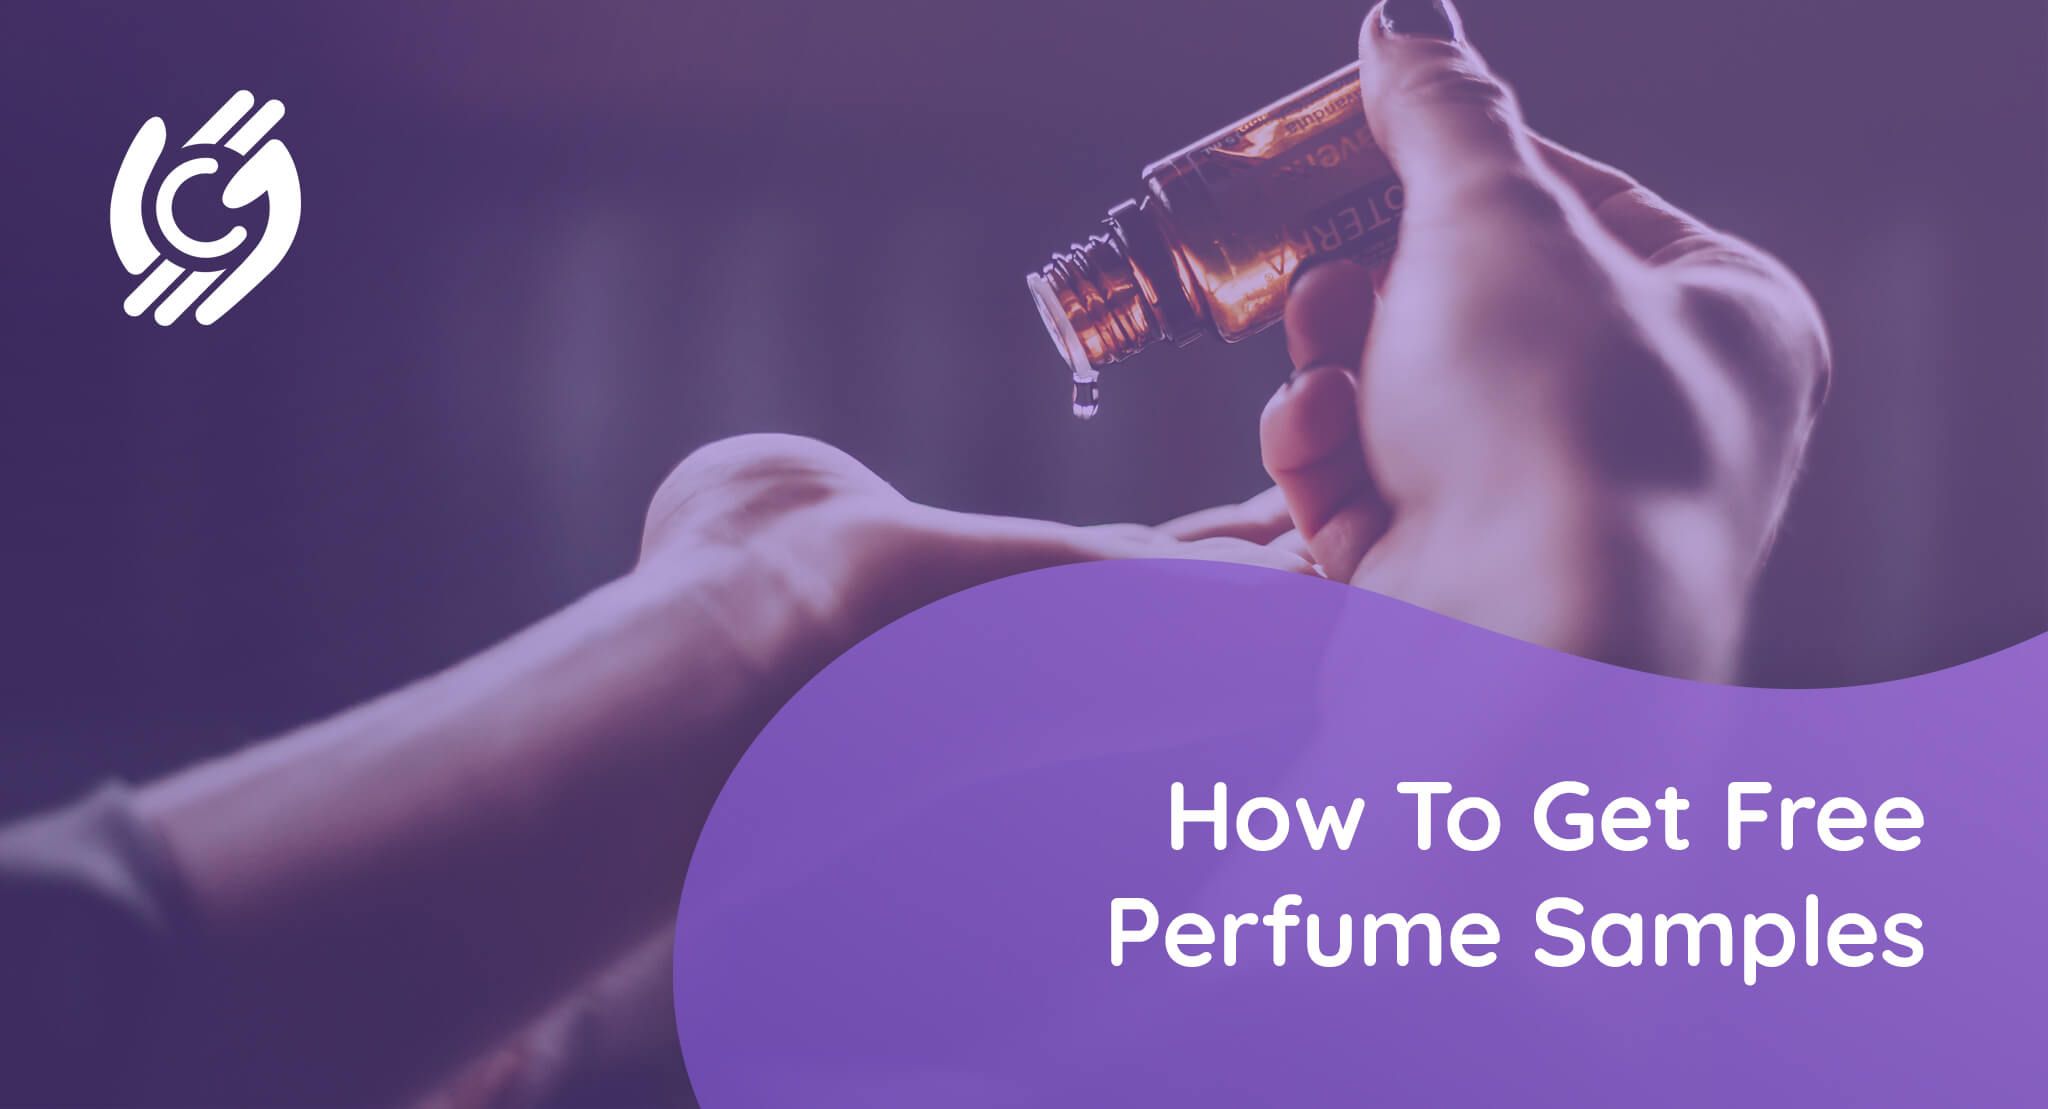 How to Get Free Perfume Samples: Sniff Out Freebies!